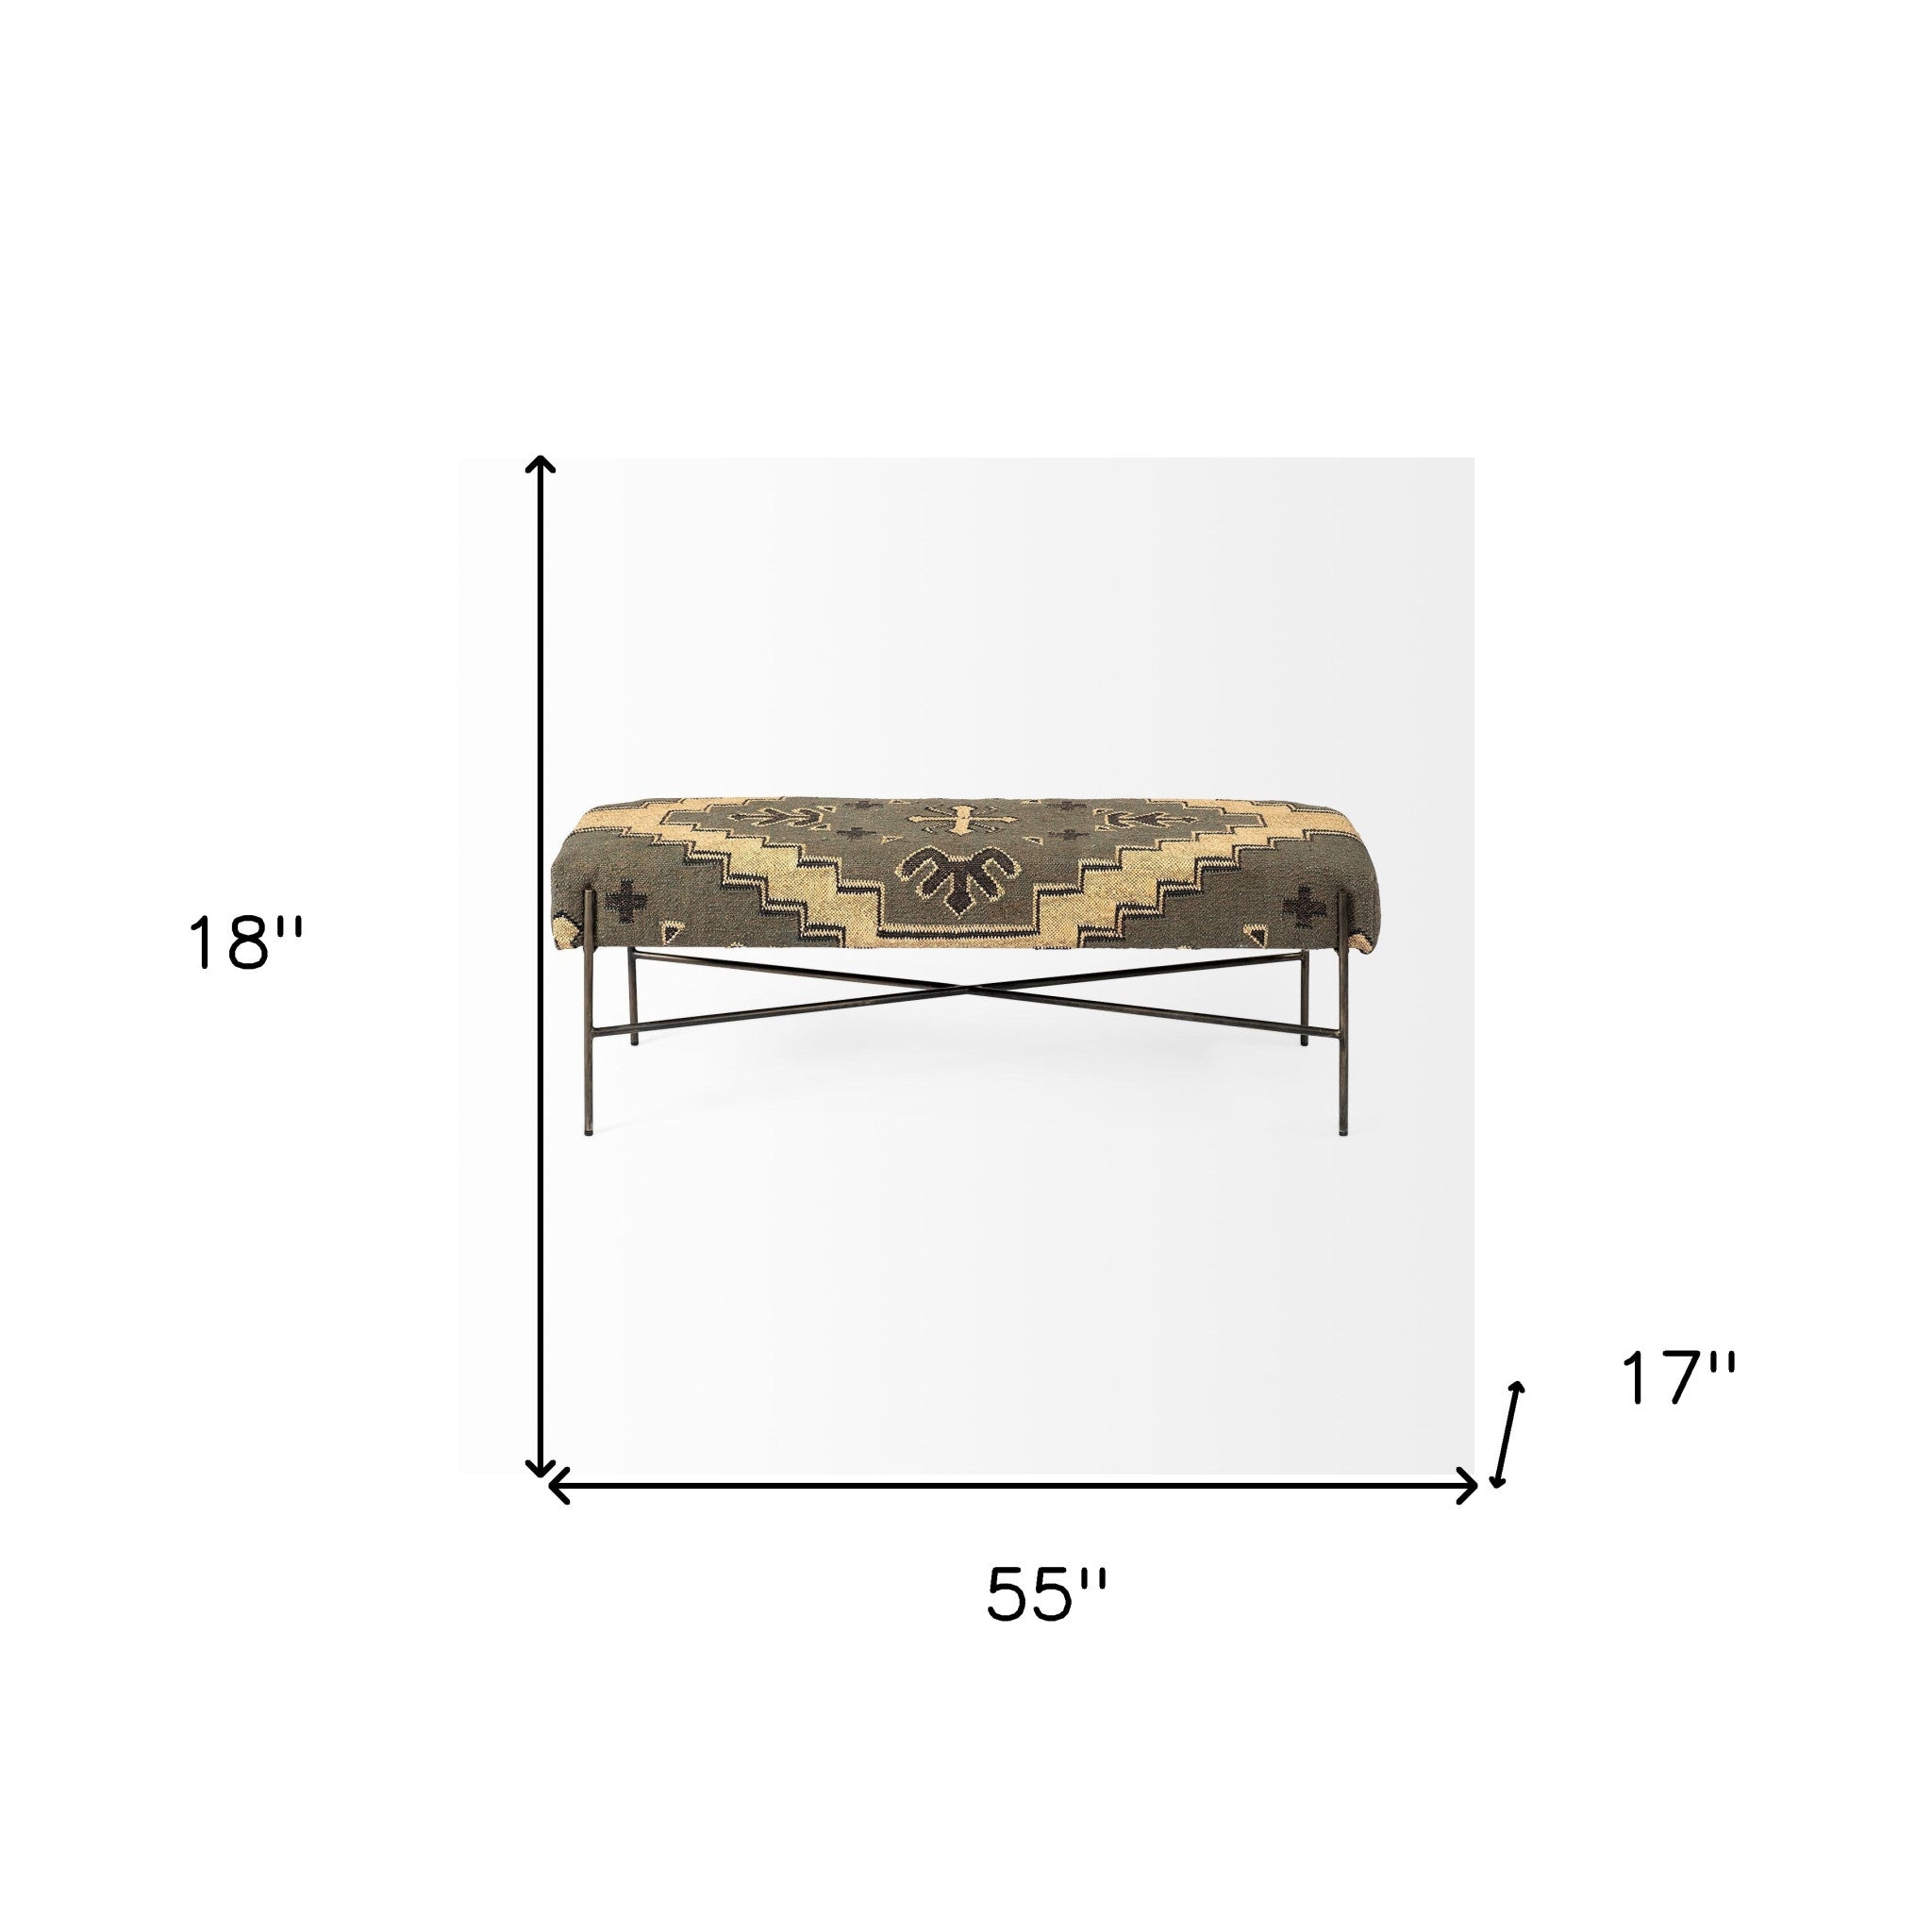 55" Green and Brown and Black Upholstered Cotton Blend Abstract Bench